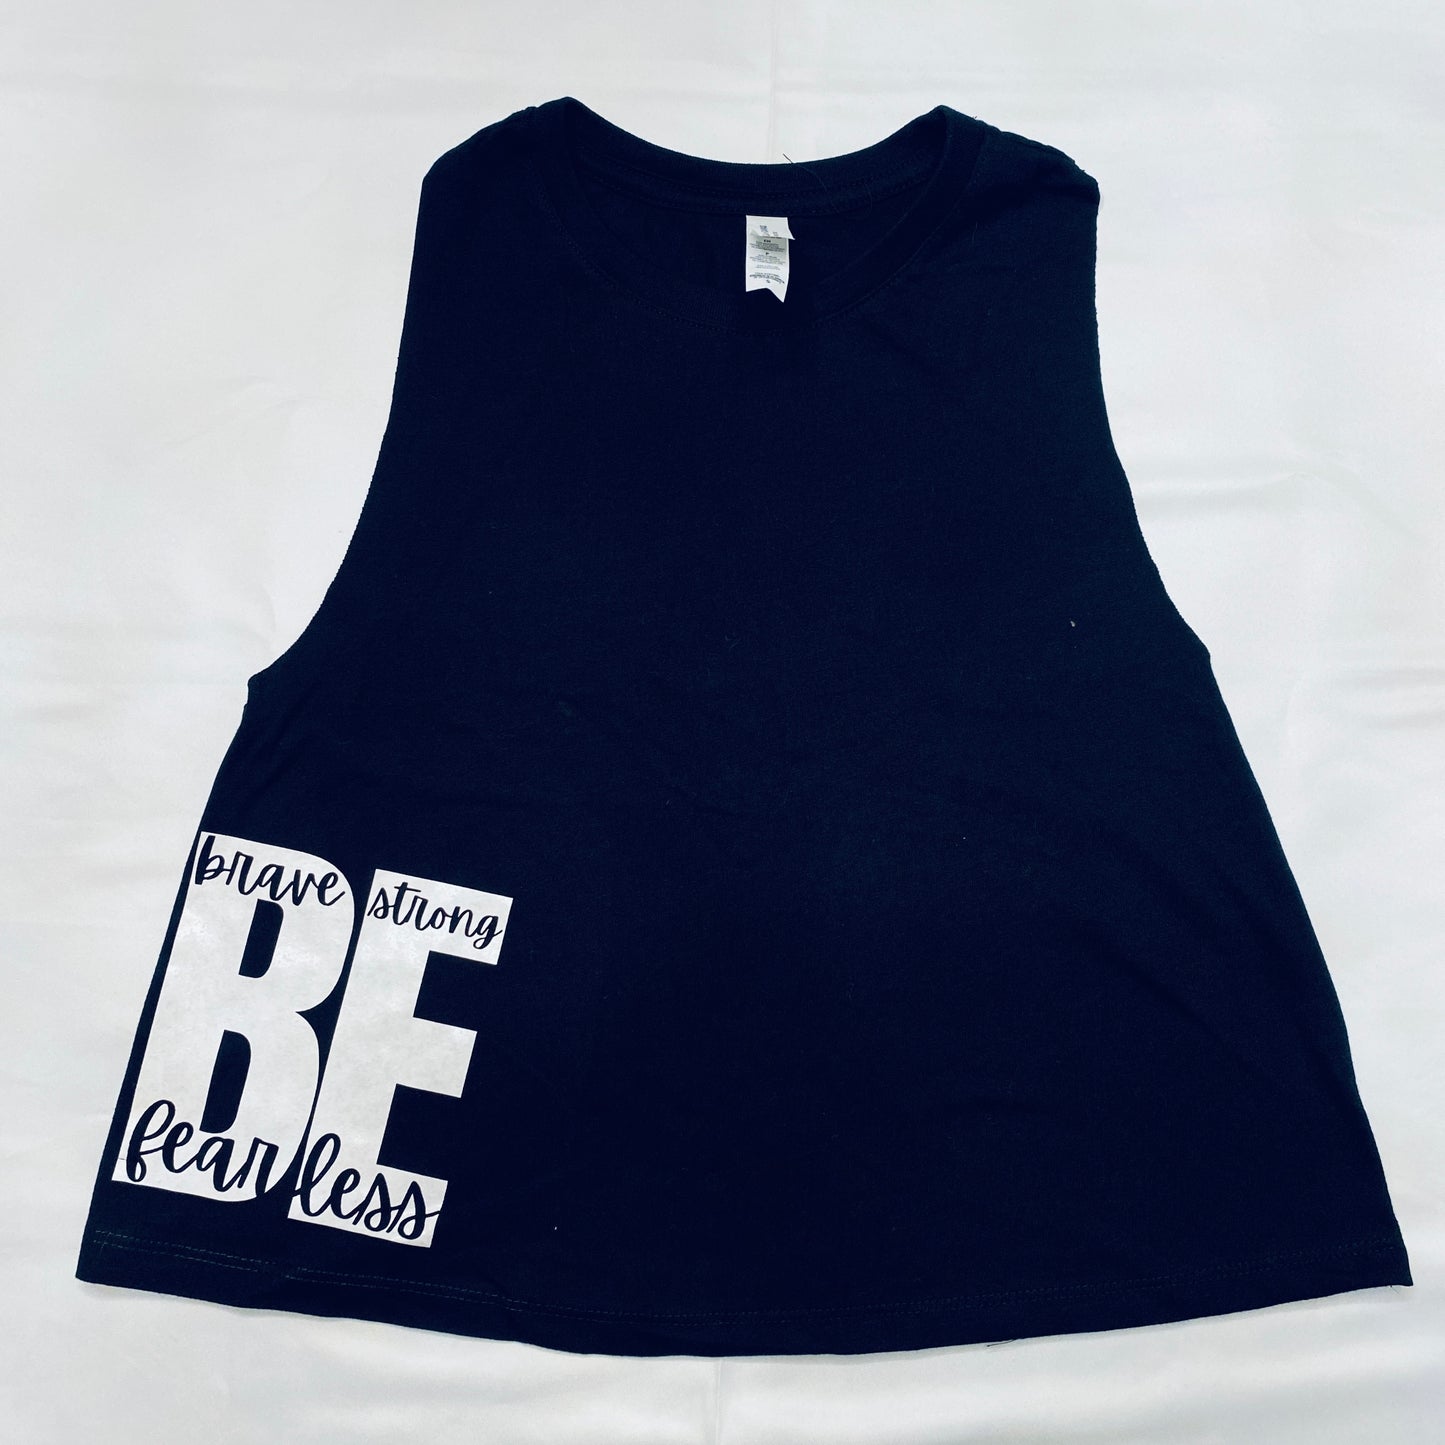 "BE" Fearless, Strong, Brave Crop Tank Black and White